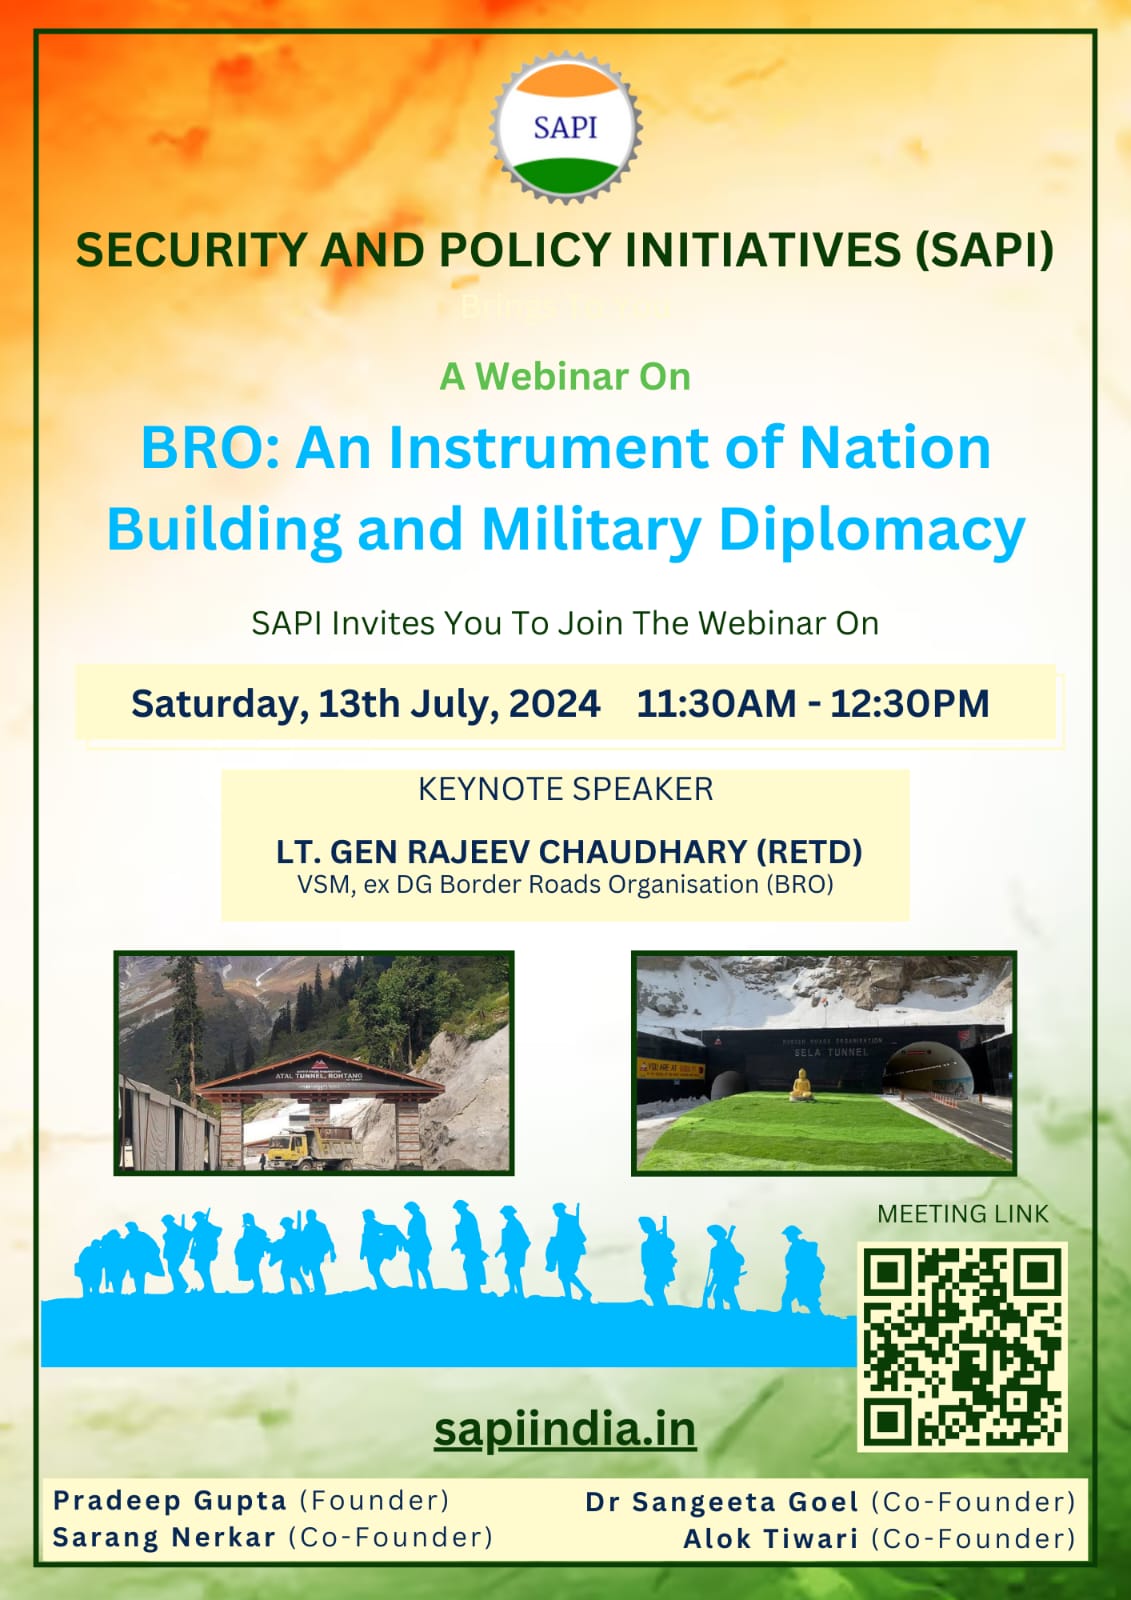 BRO: An Instrument of Nation Building And Military Diplomacy by Lt Gen